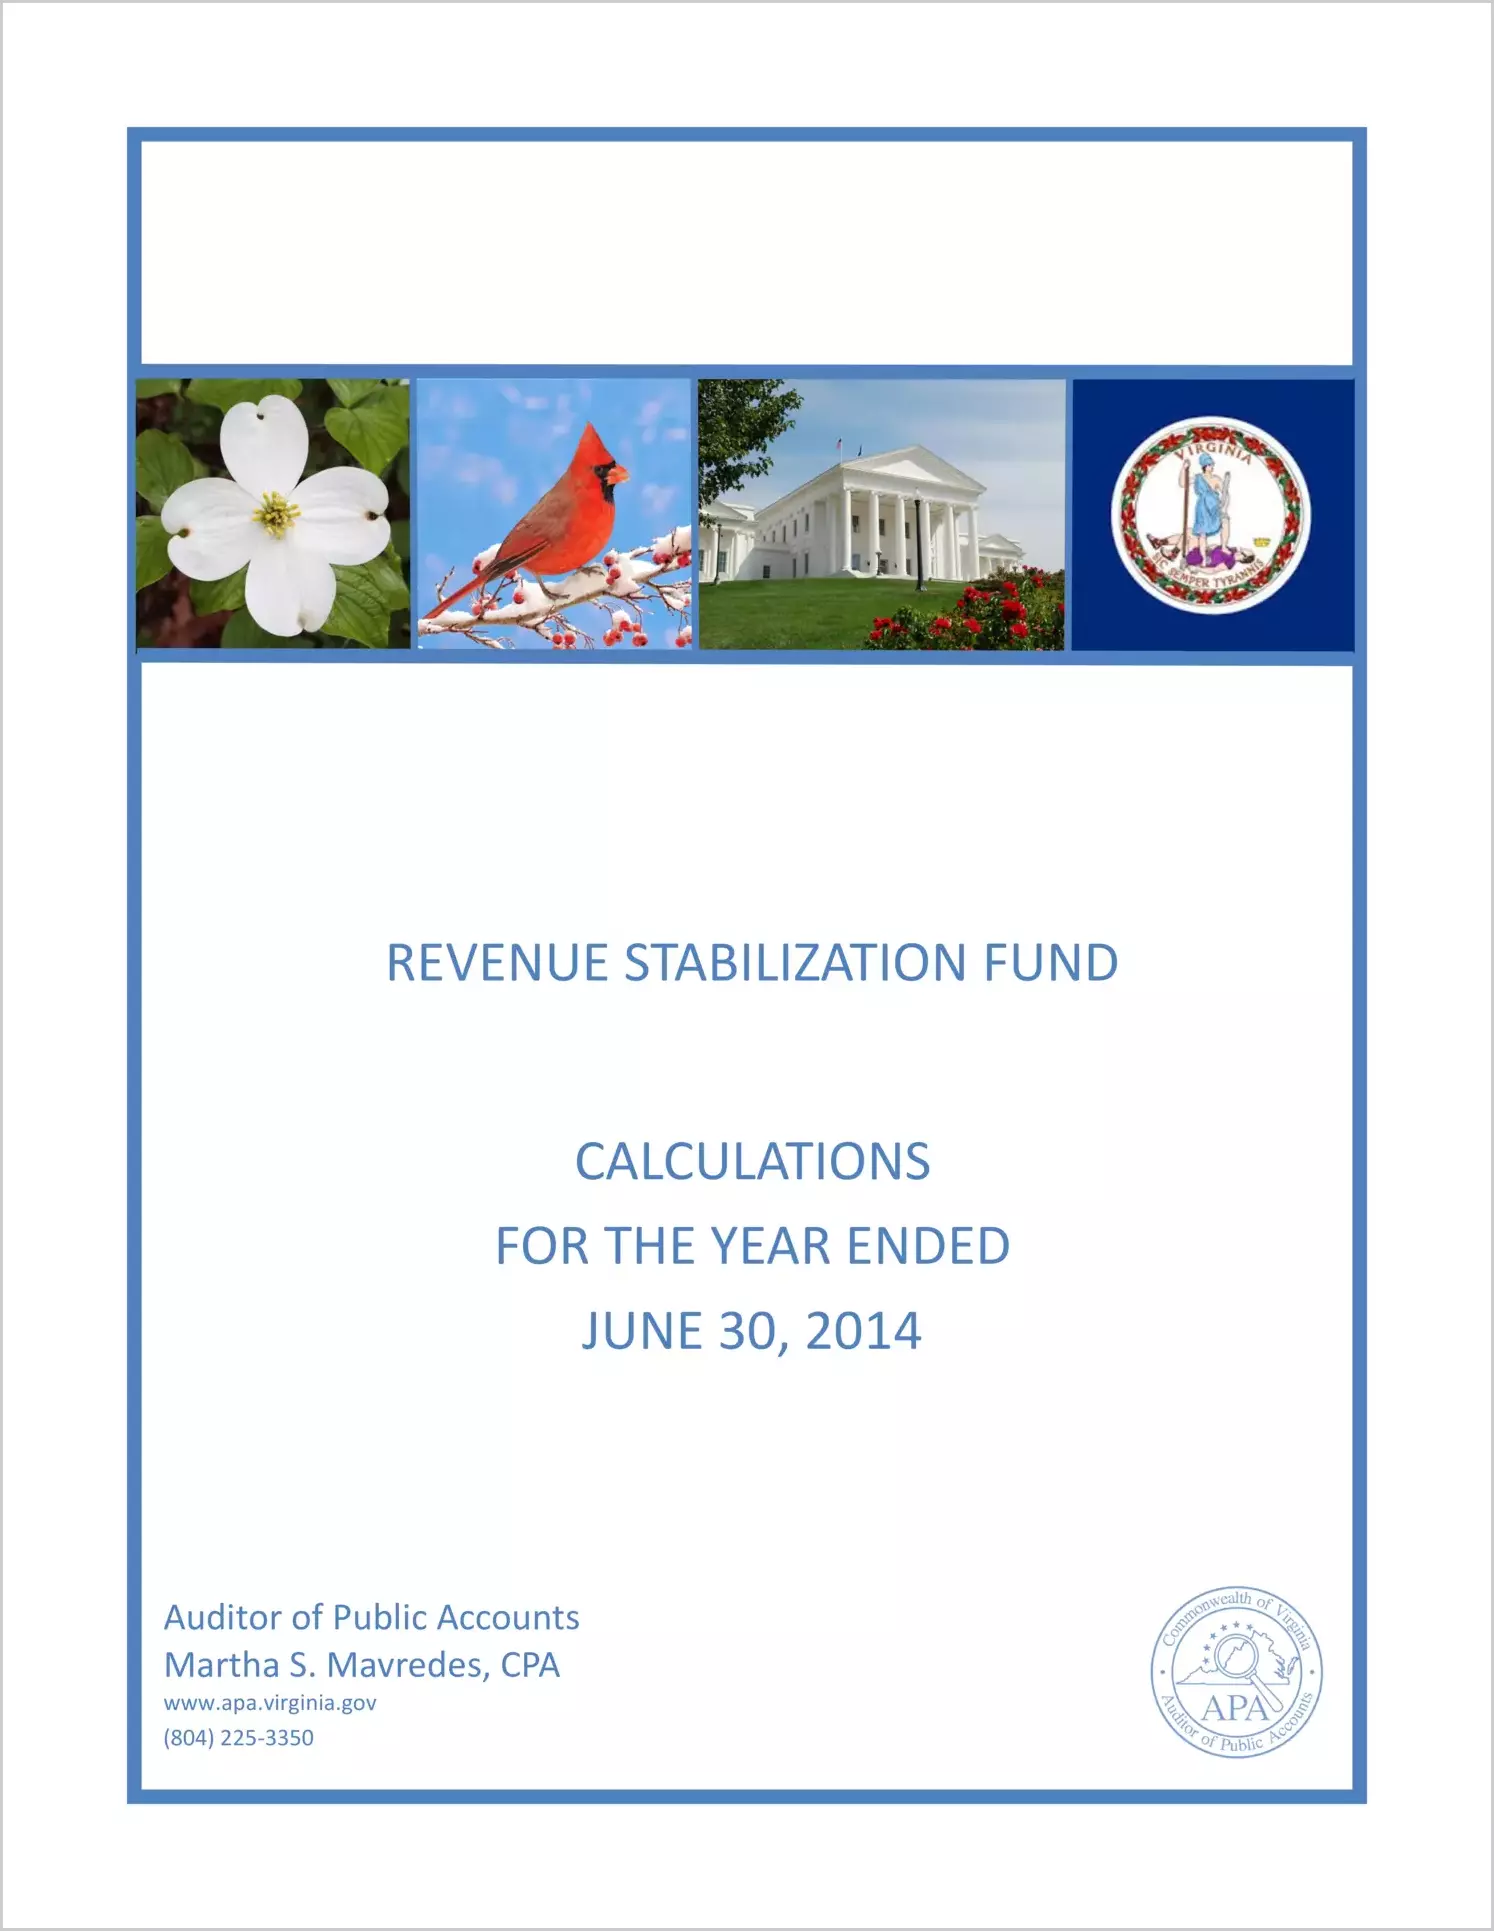 Revenue Stabilization Fund Calculations for the year ended June 30, 2014